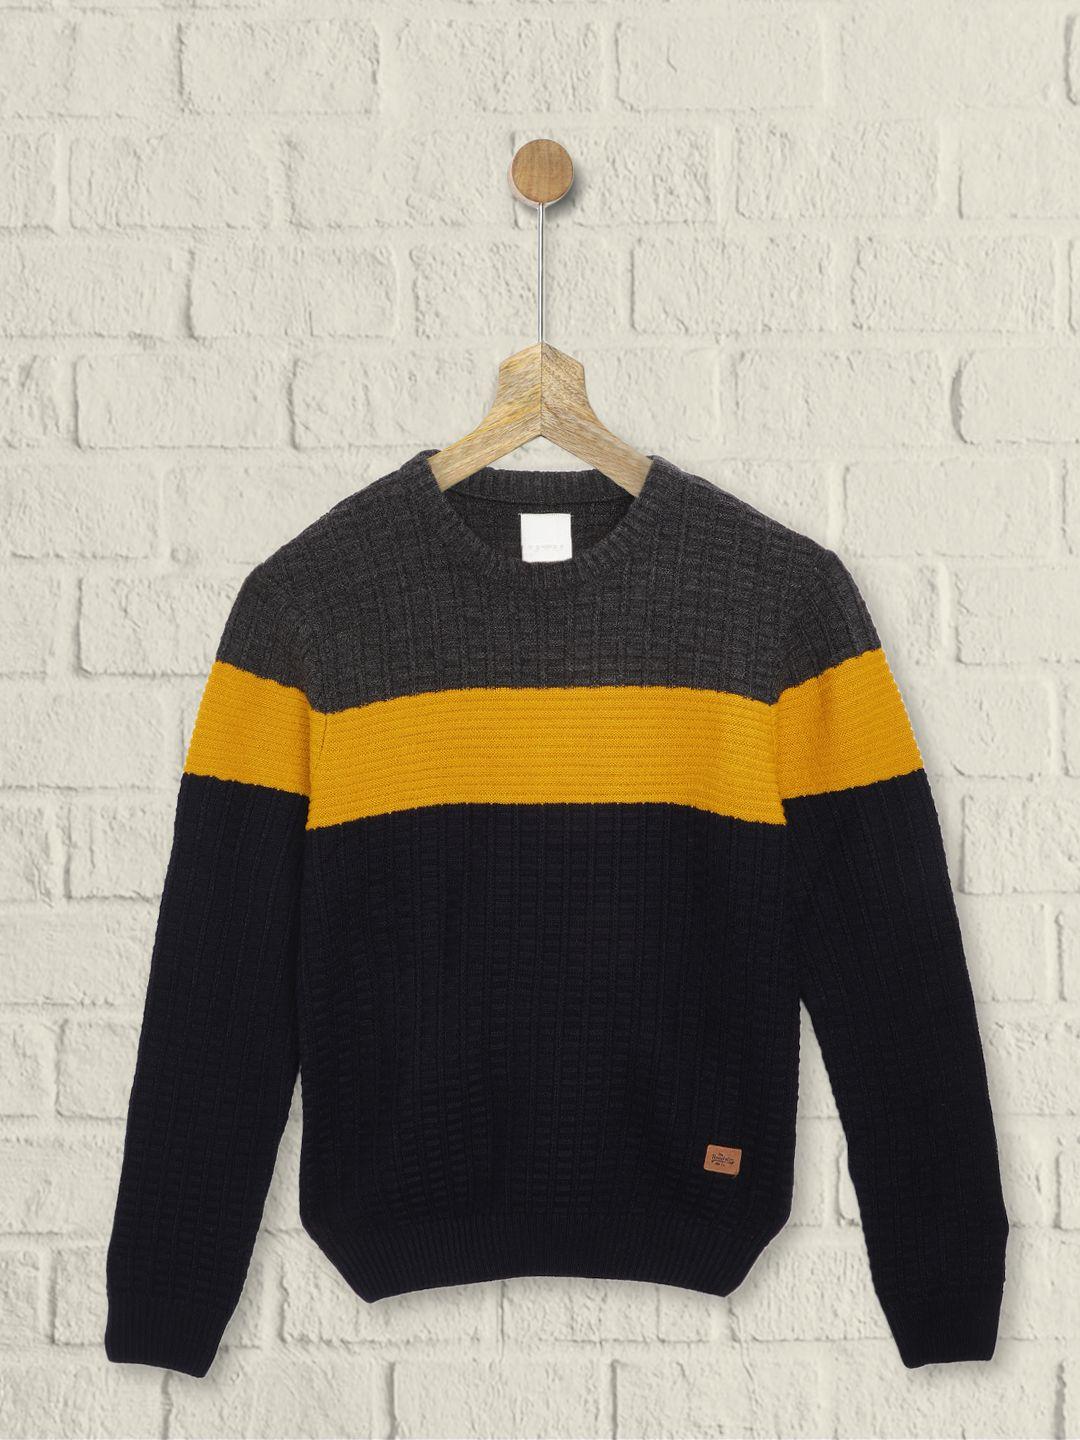 uth by roadster boys charcoal black & mustard yellow acrylic colourblocked pullover